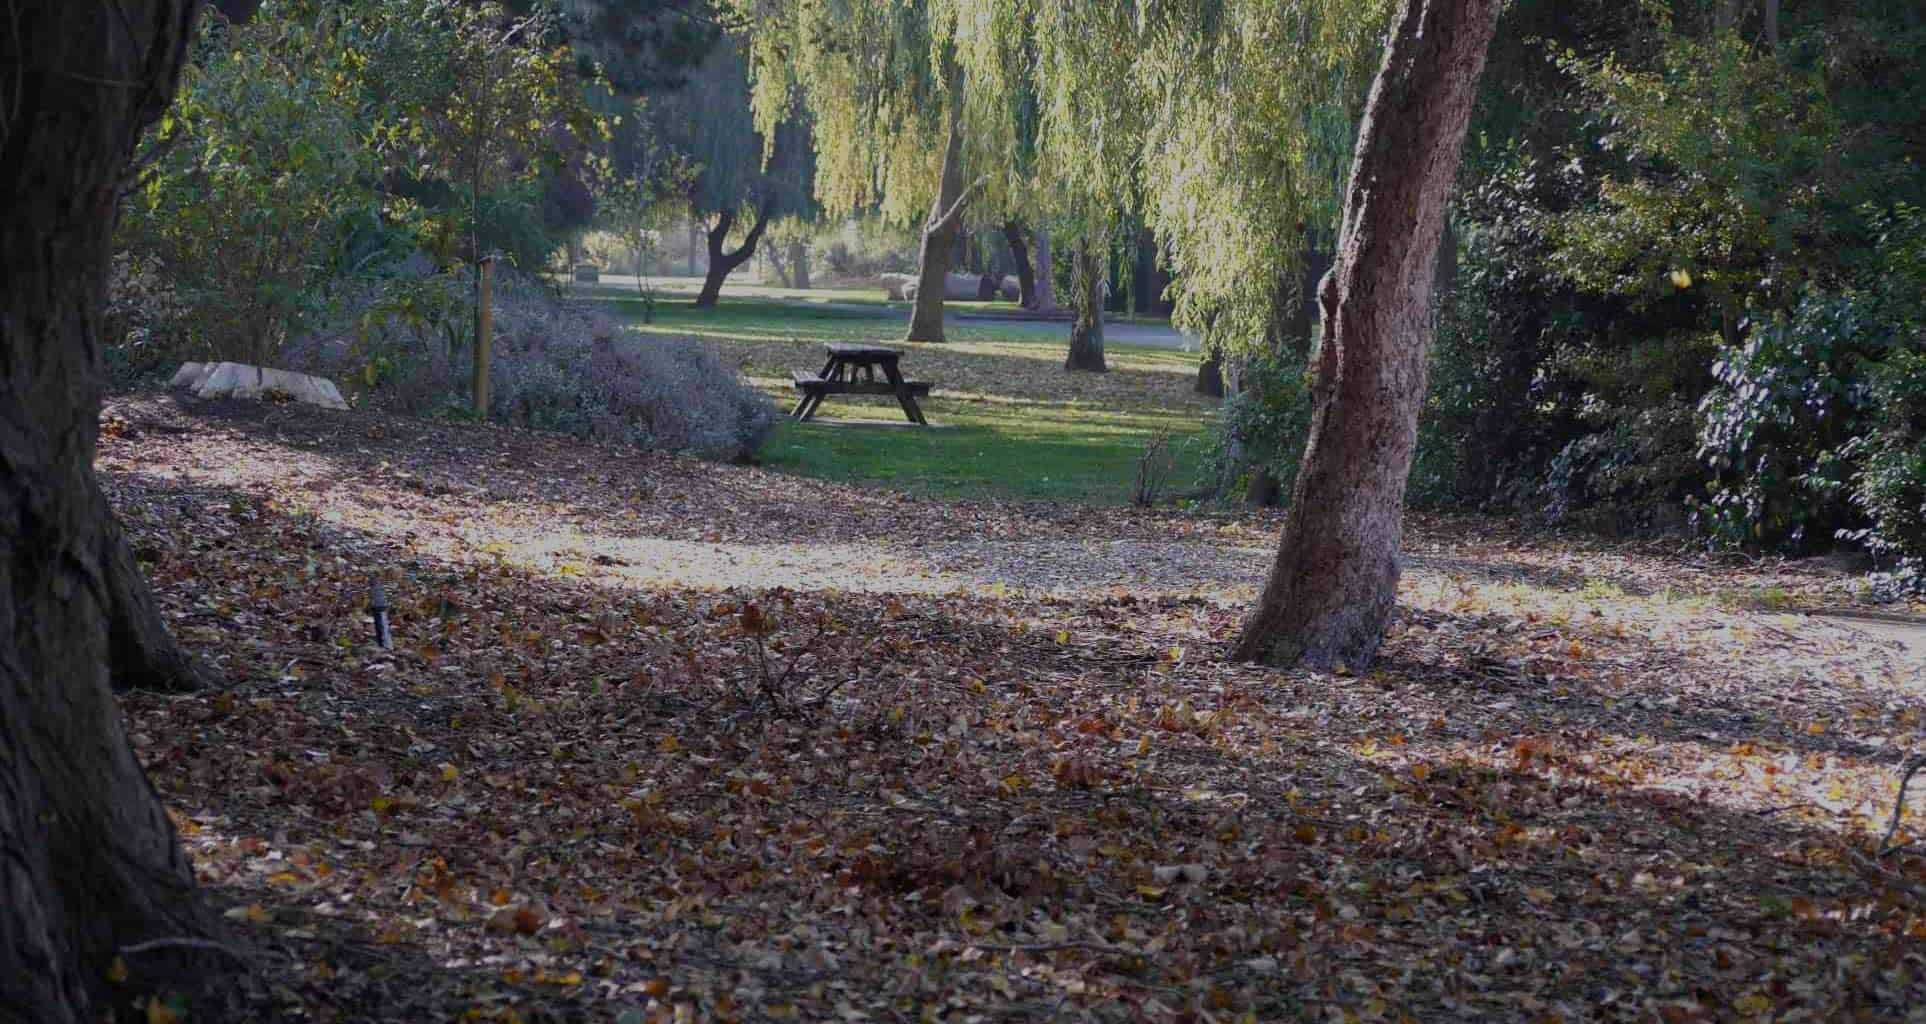 A serene Radipole Park scene with a winding path covered in fallen leaves, featuring trees and a distant picnic bench, bathed in soft sunlight.